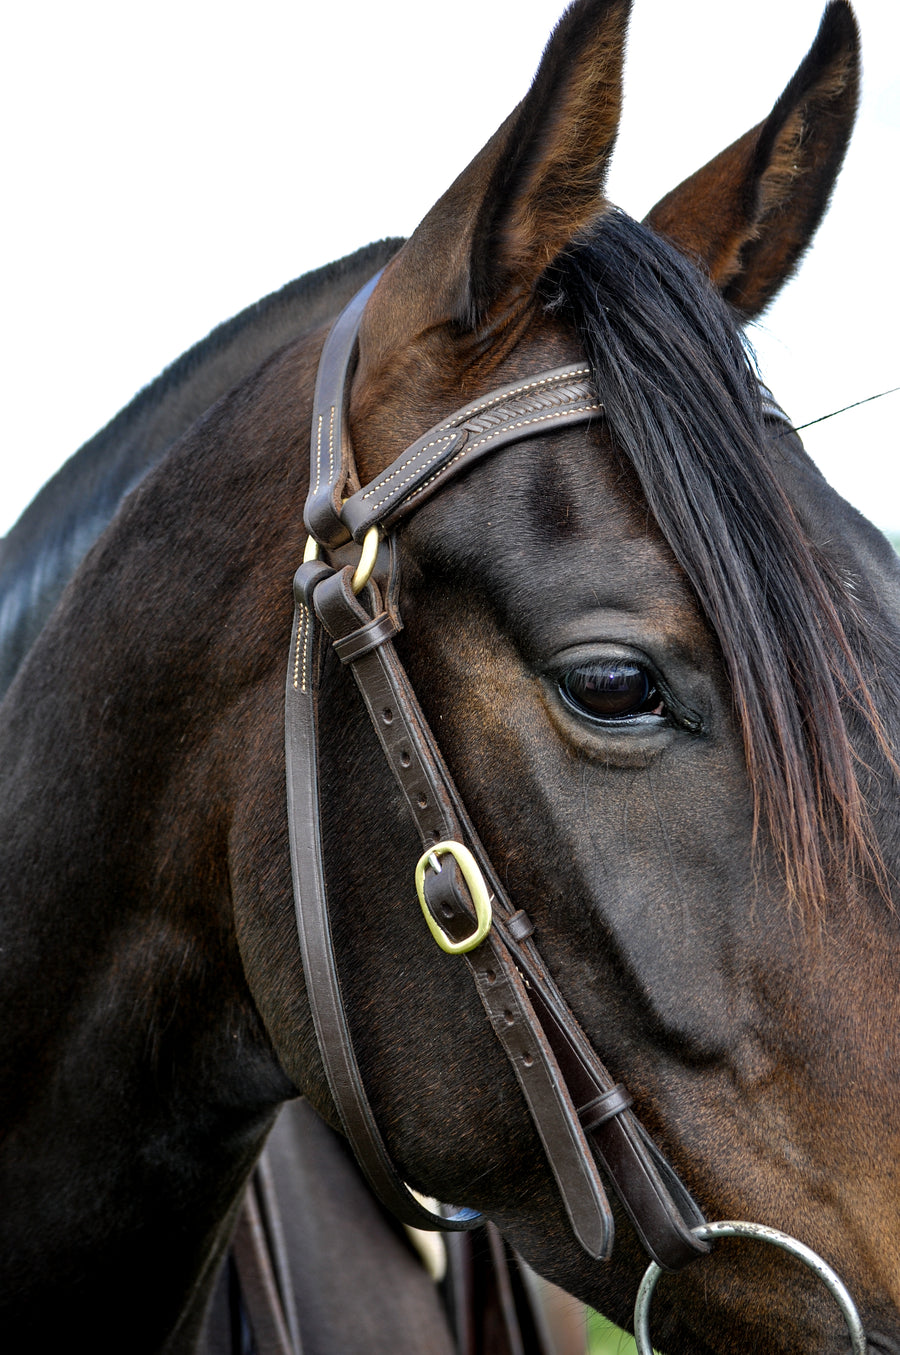 Laced Forehead bridle handcrafted by John Lordan